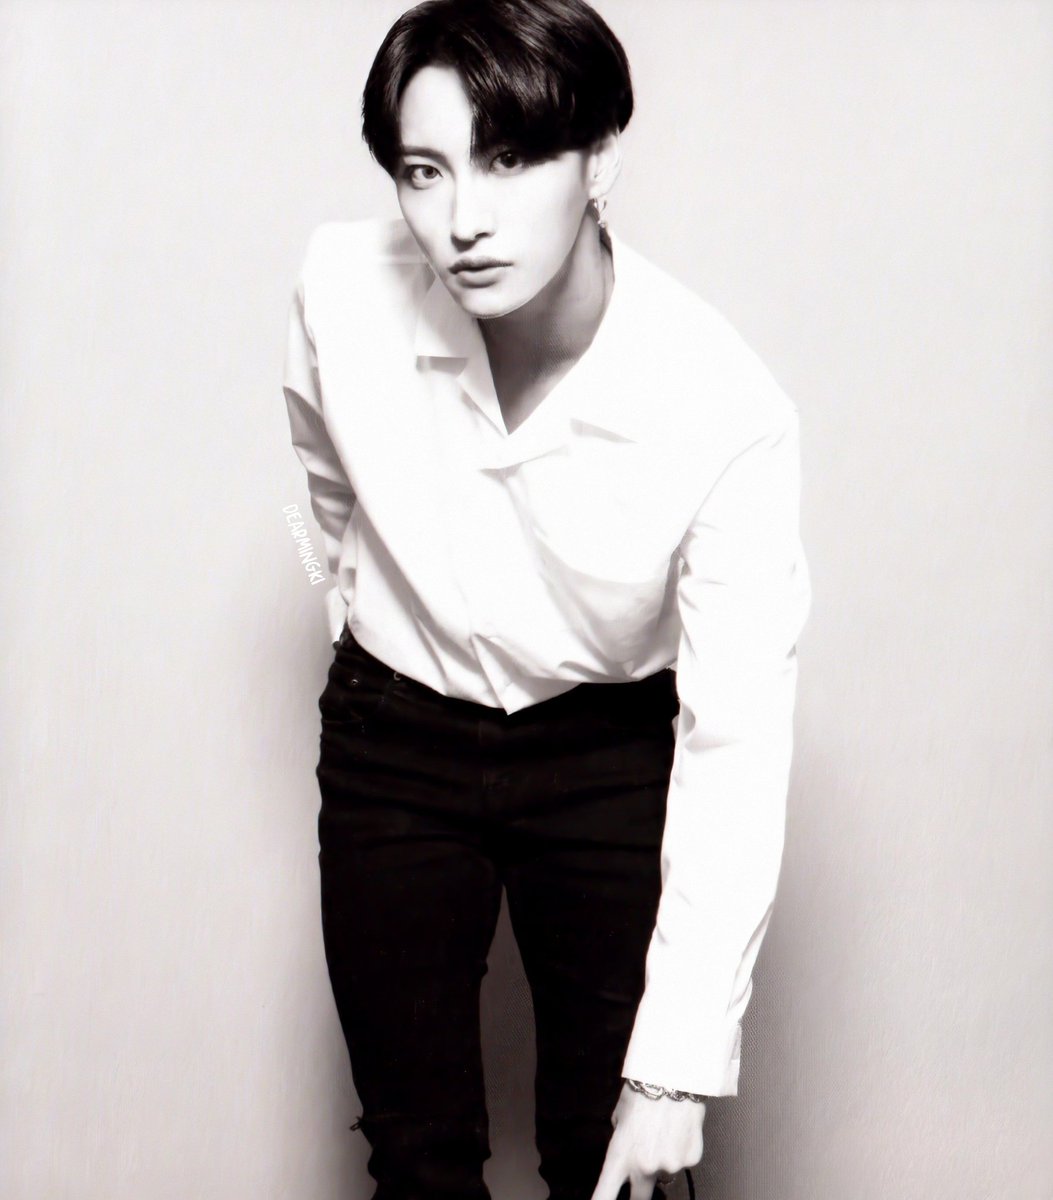 seonghwa modeling contract now